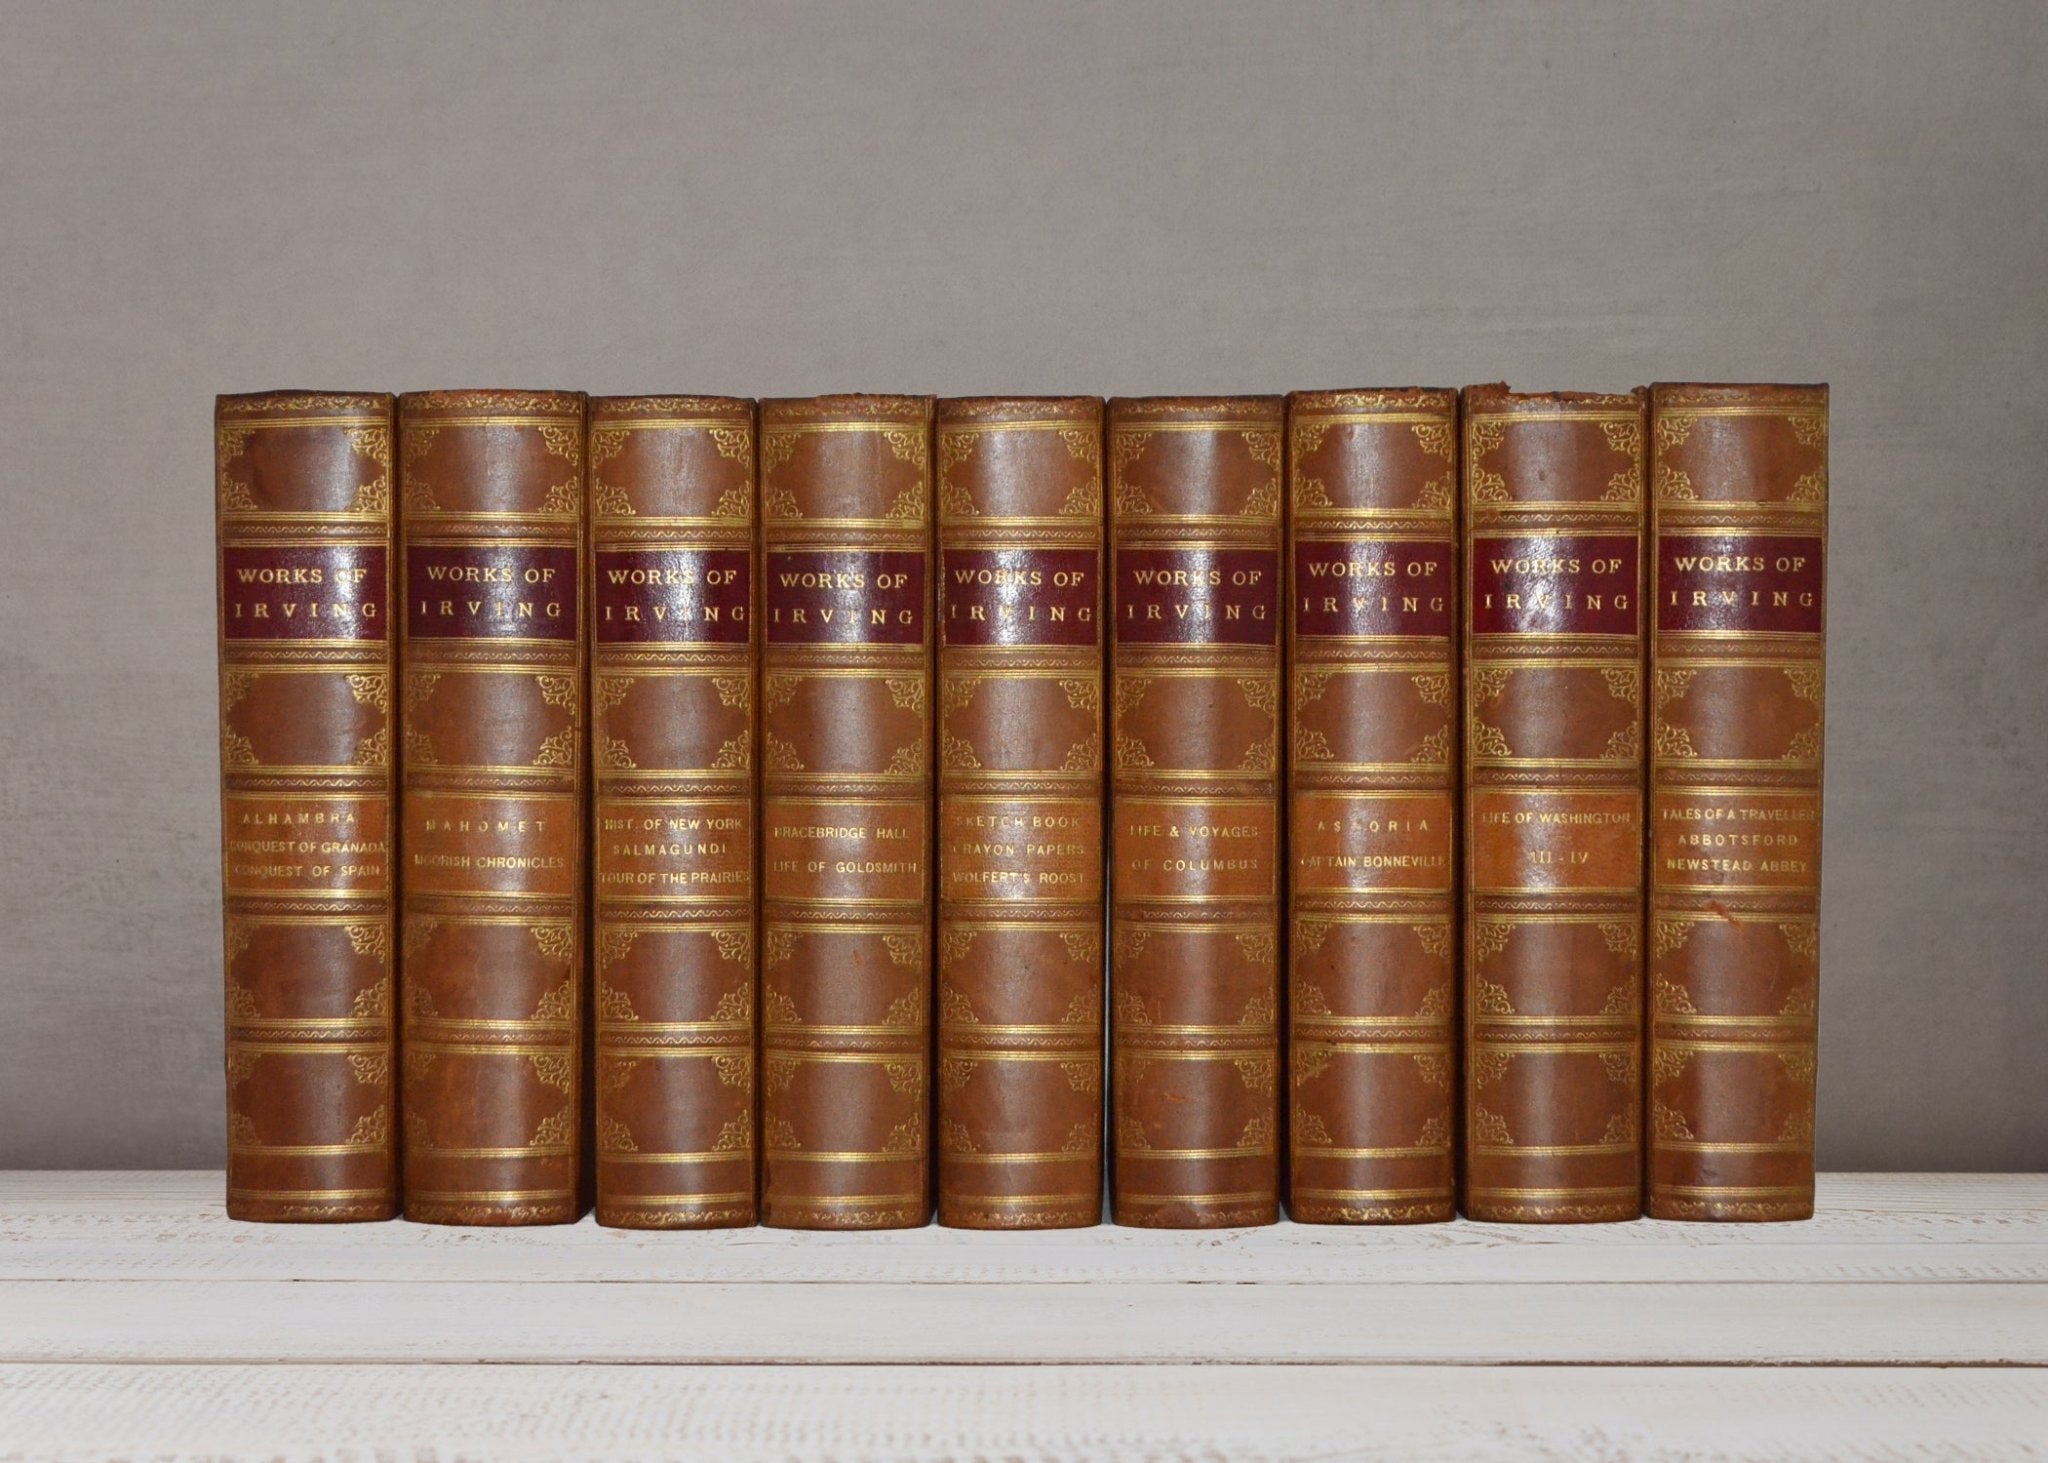 Set of 3 Leatherbound Antique Books - Fireside Antiques